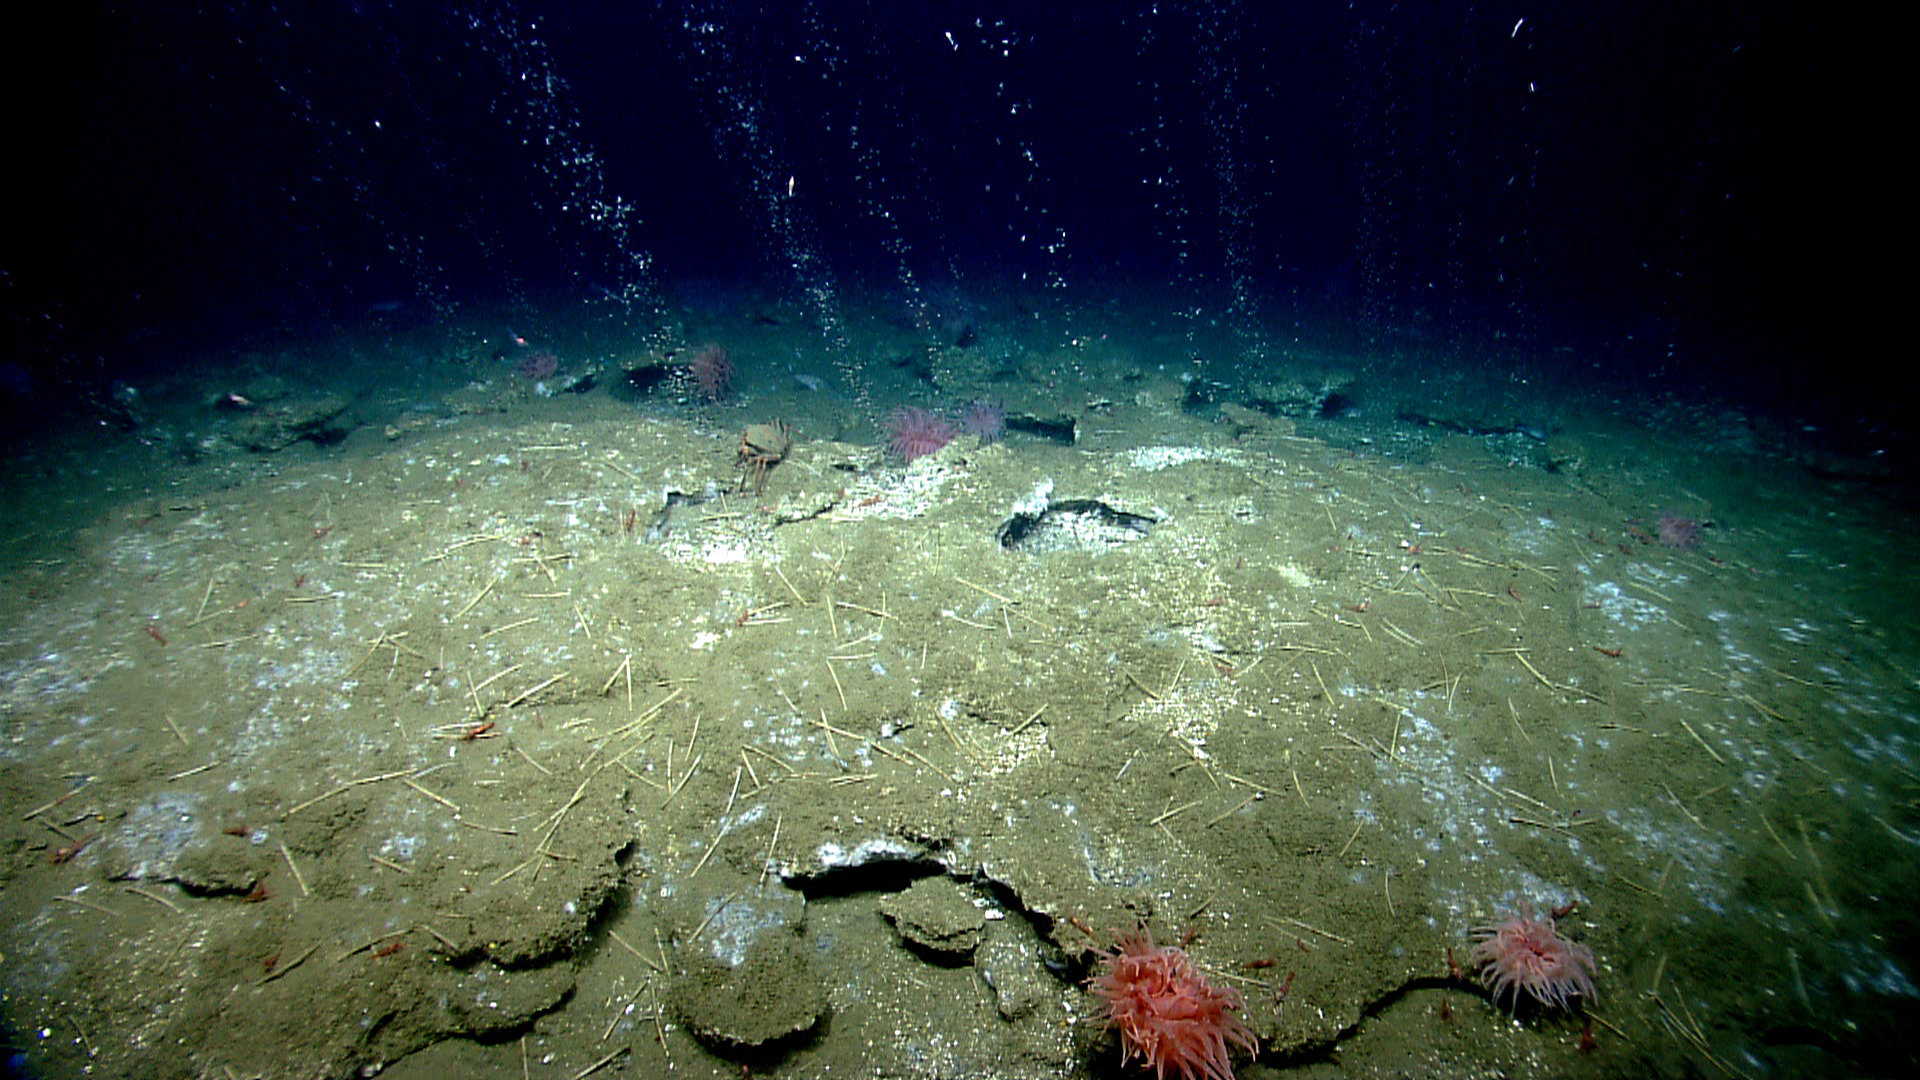 cold seep site with several plumes of bubbles rising up from the sediment